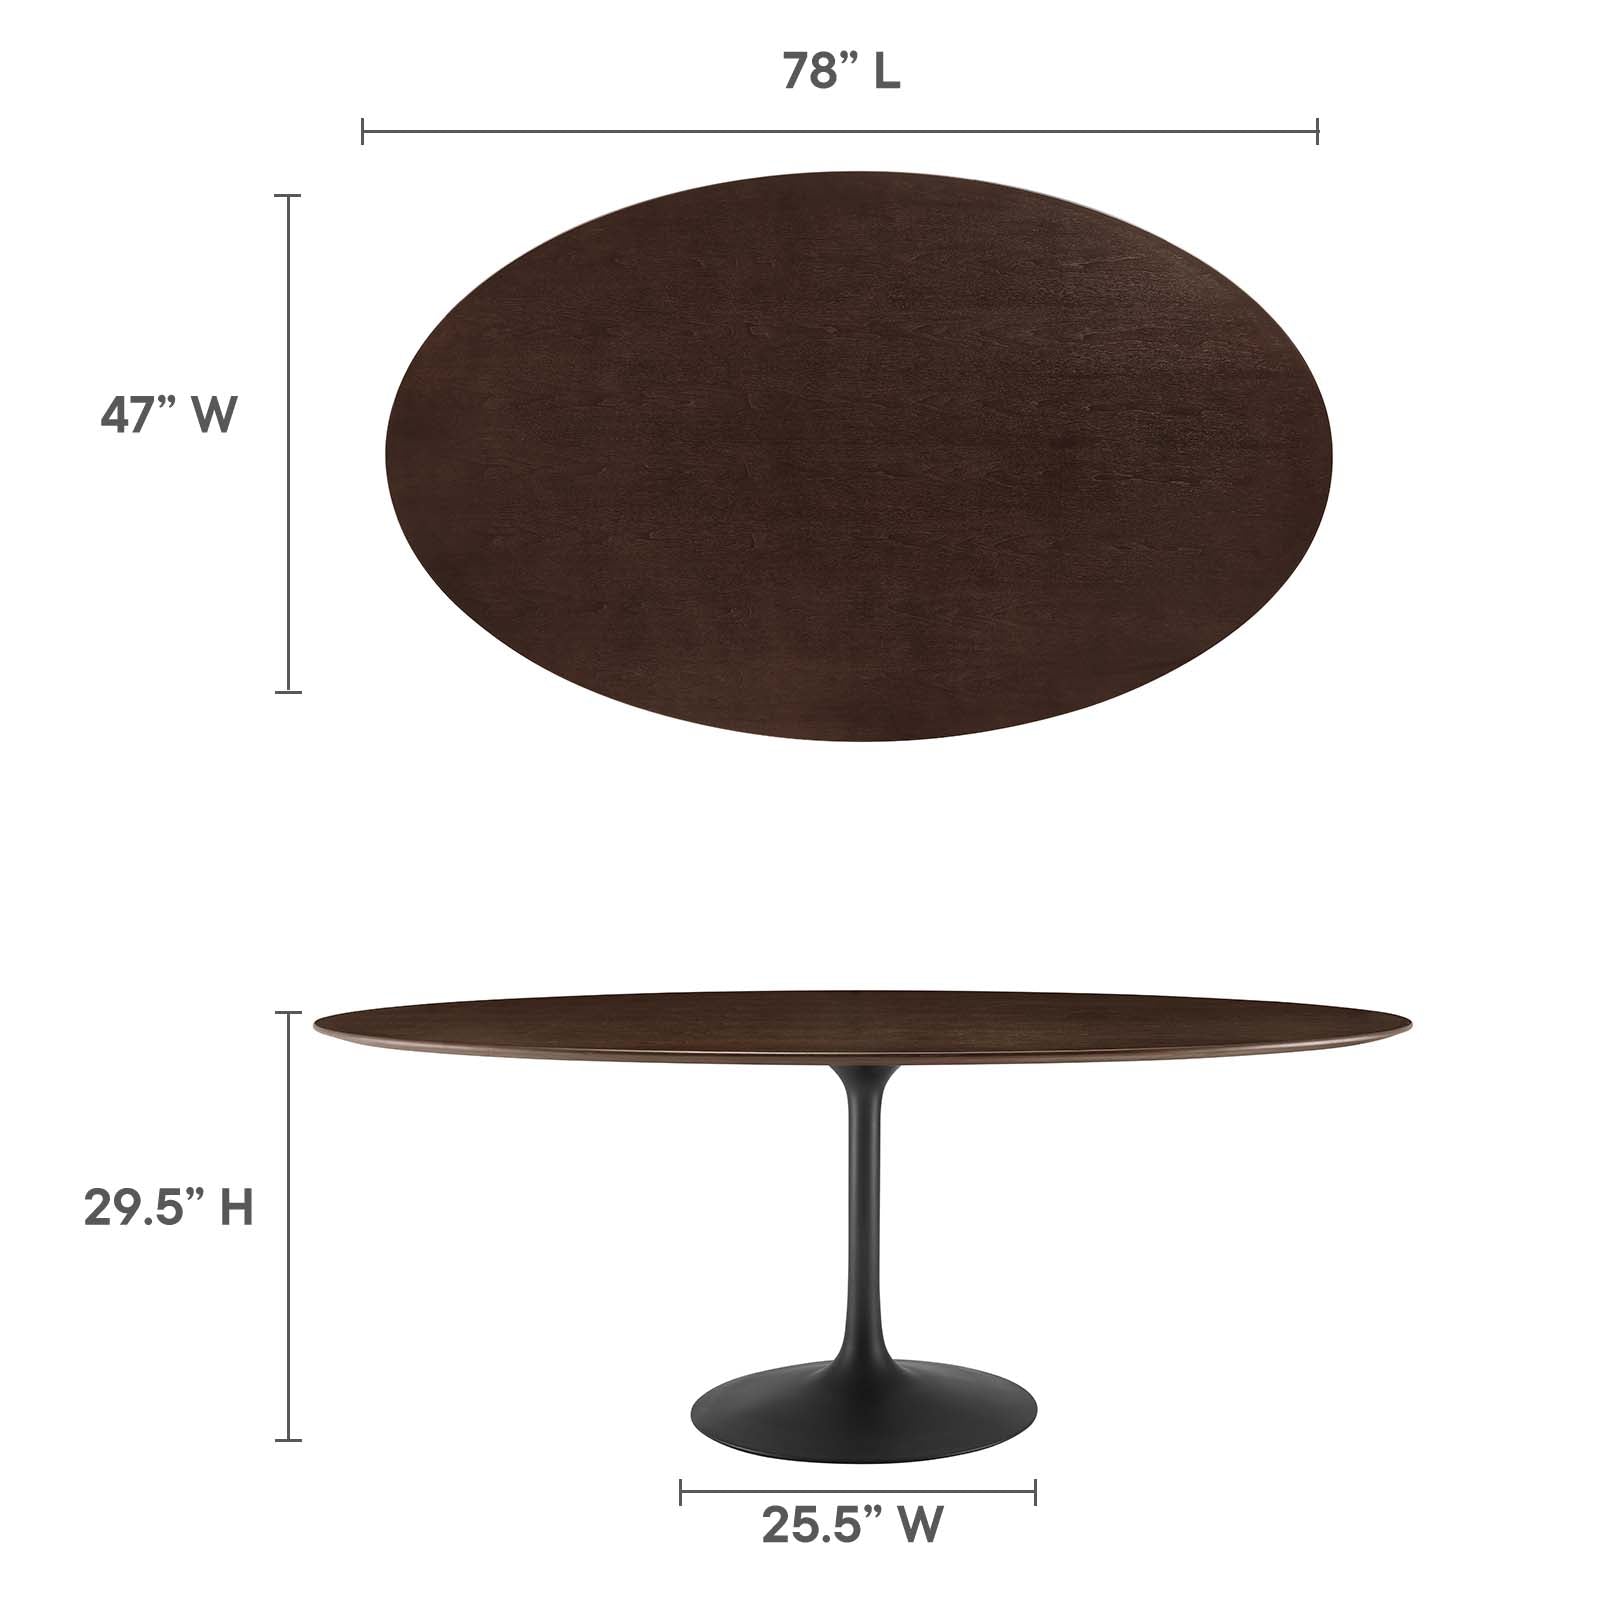 Modway Dining Tables - Lippa 78" Wood Oval Dining Table Black Cherry Walnut